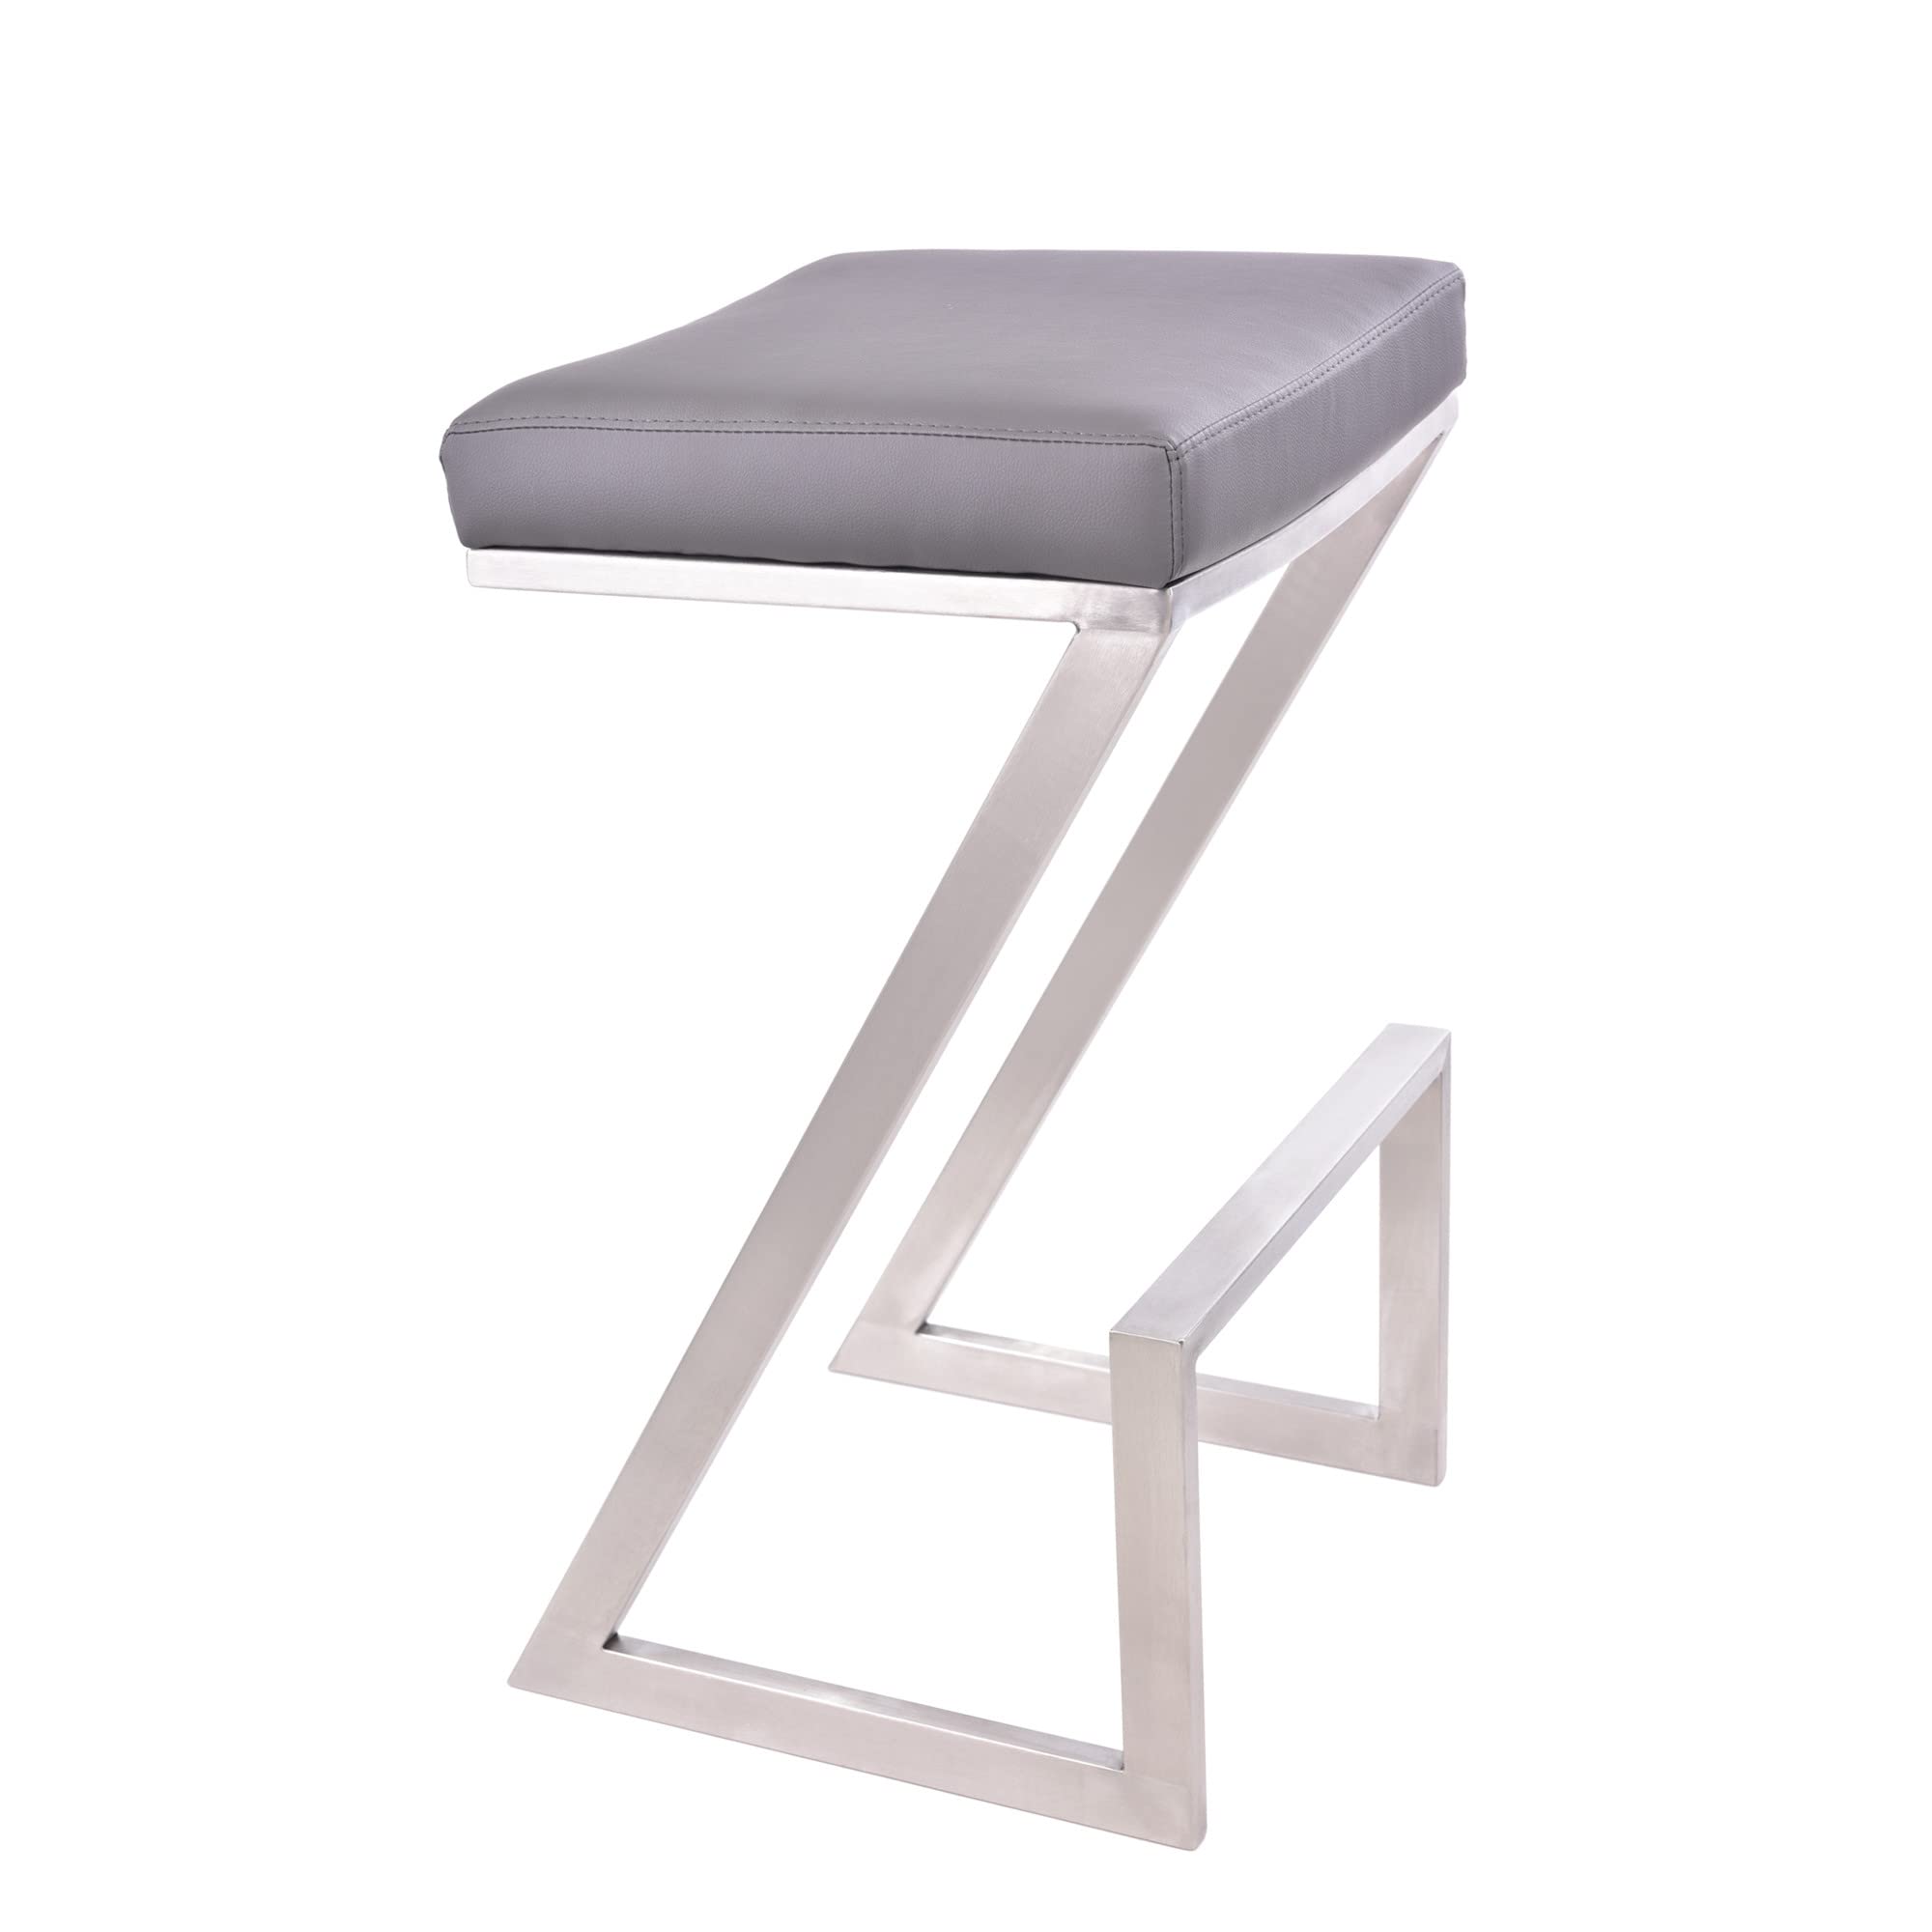 30" ContempoGrey Faux Leather and Stainless Backless Bar Stool